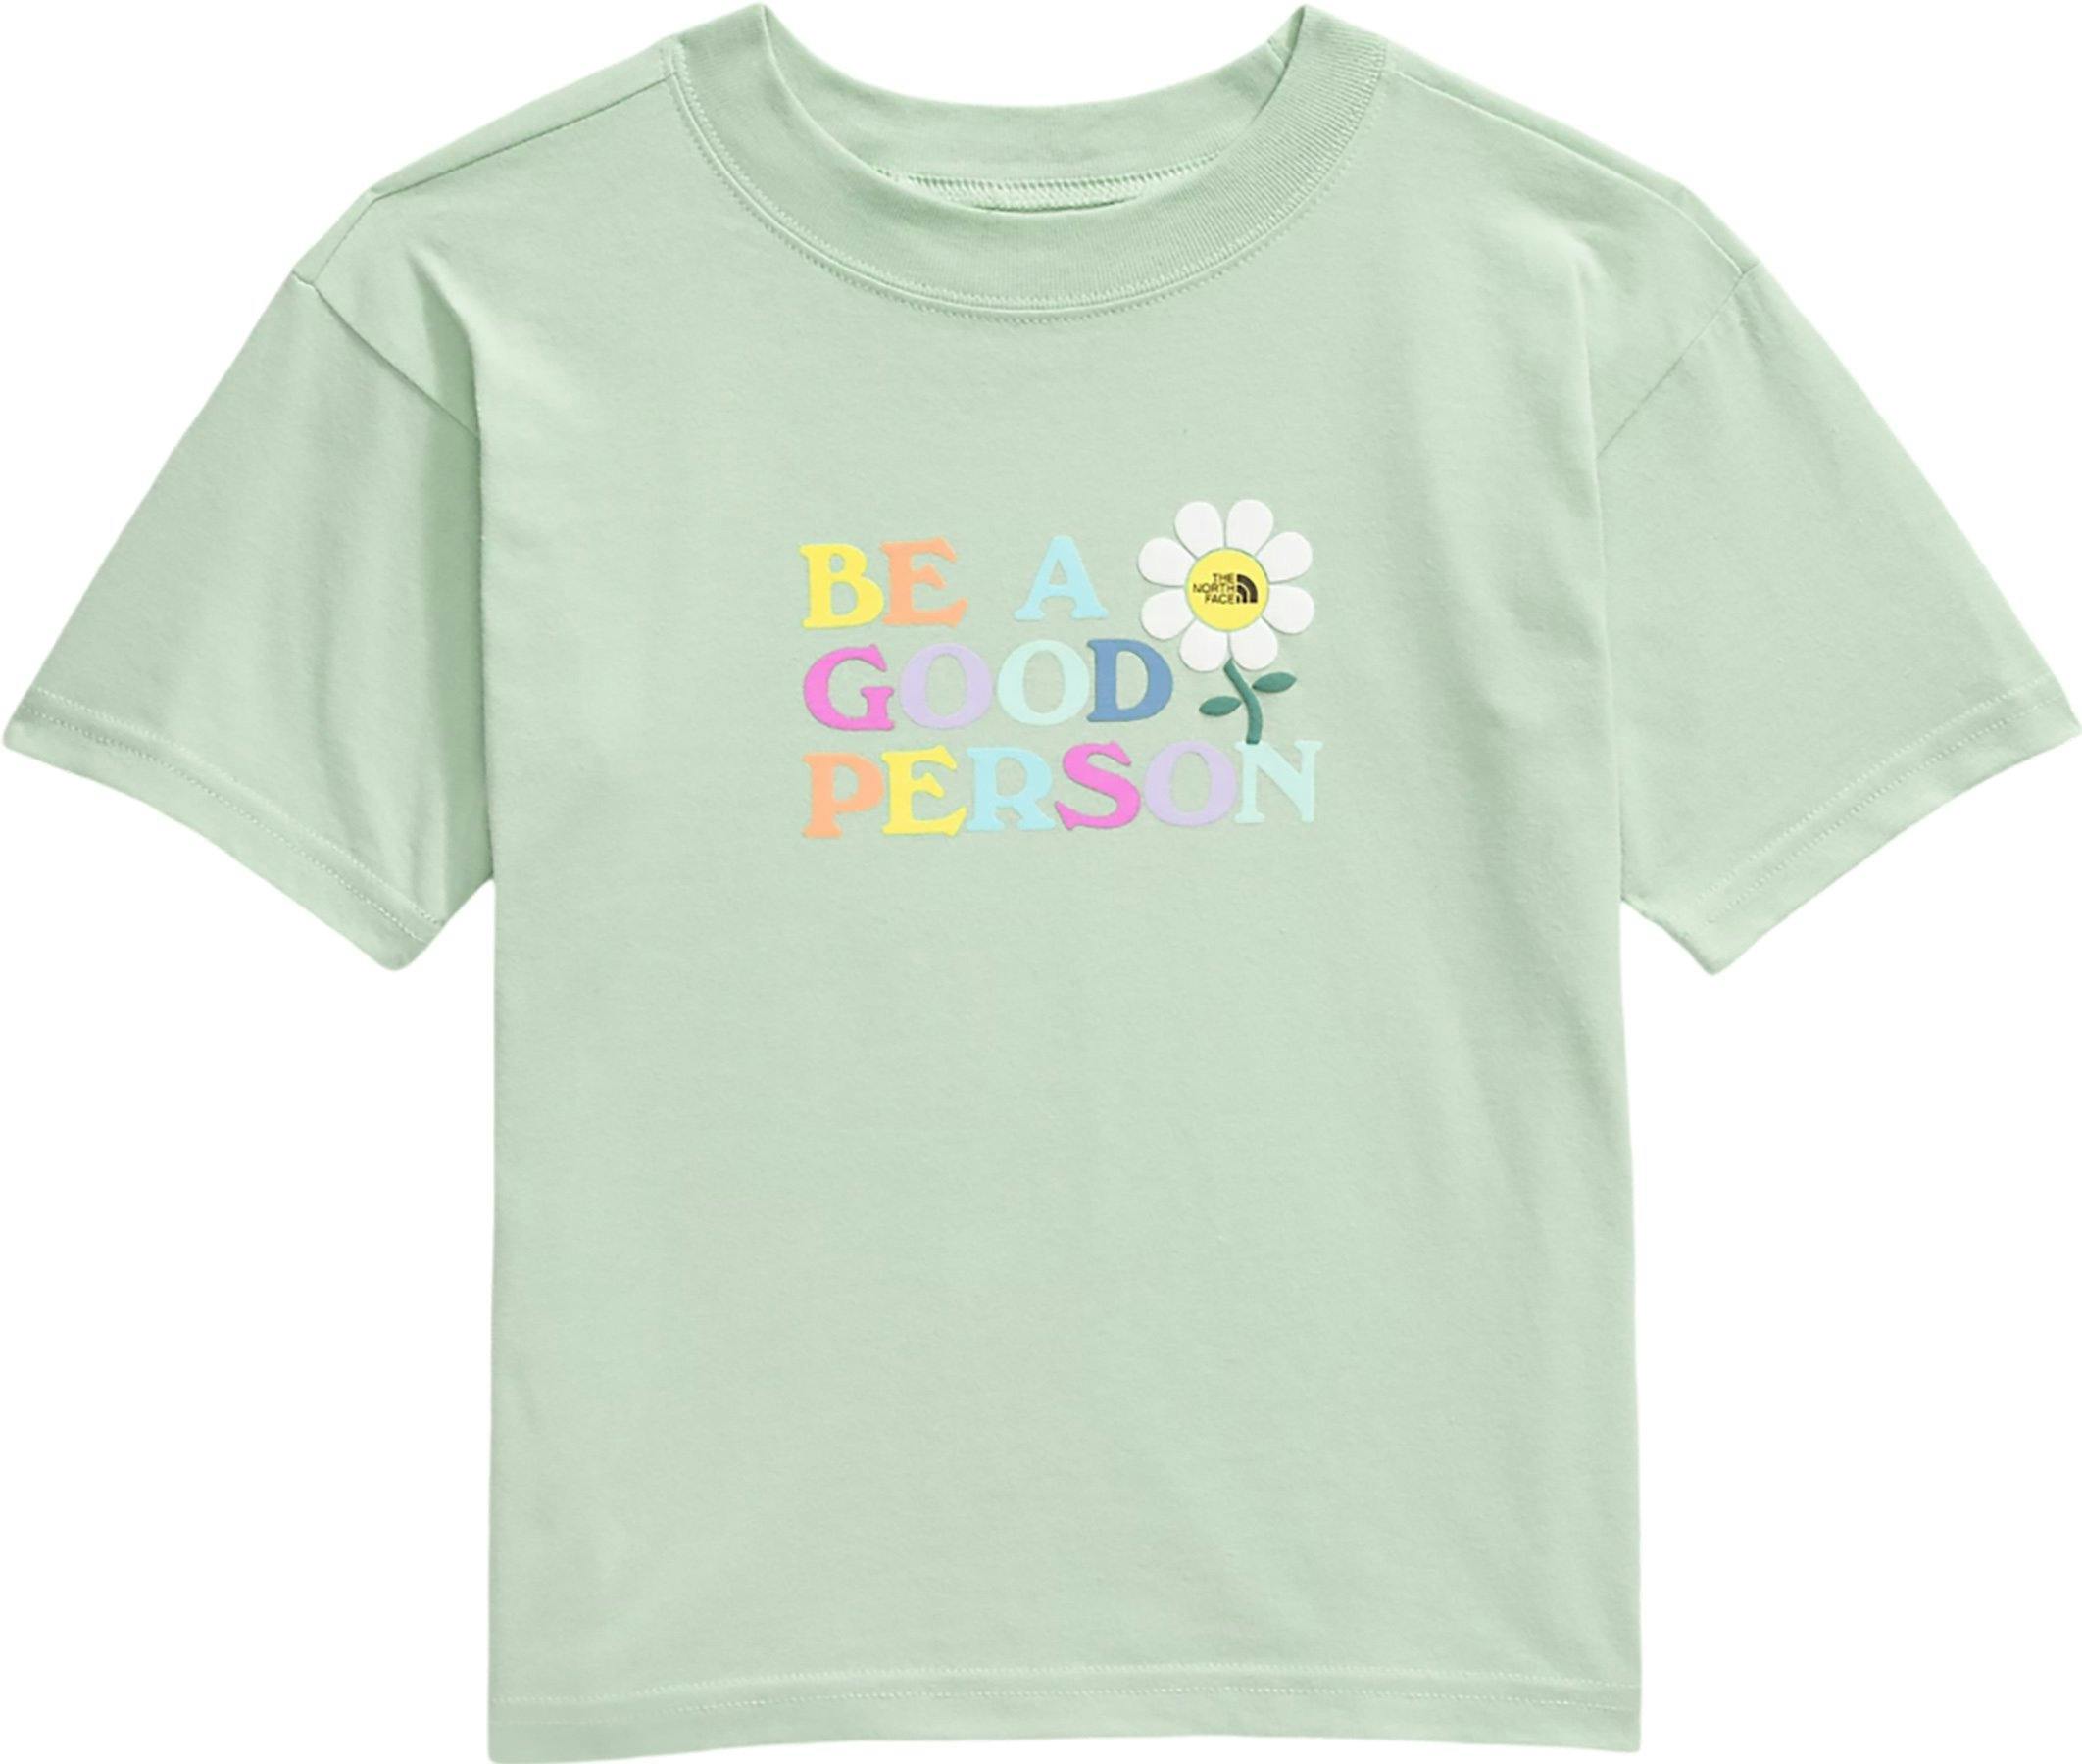 Product image for Short-Sleeve Graphic T-shirt - Kids